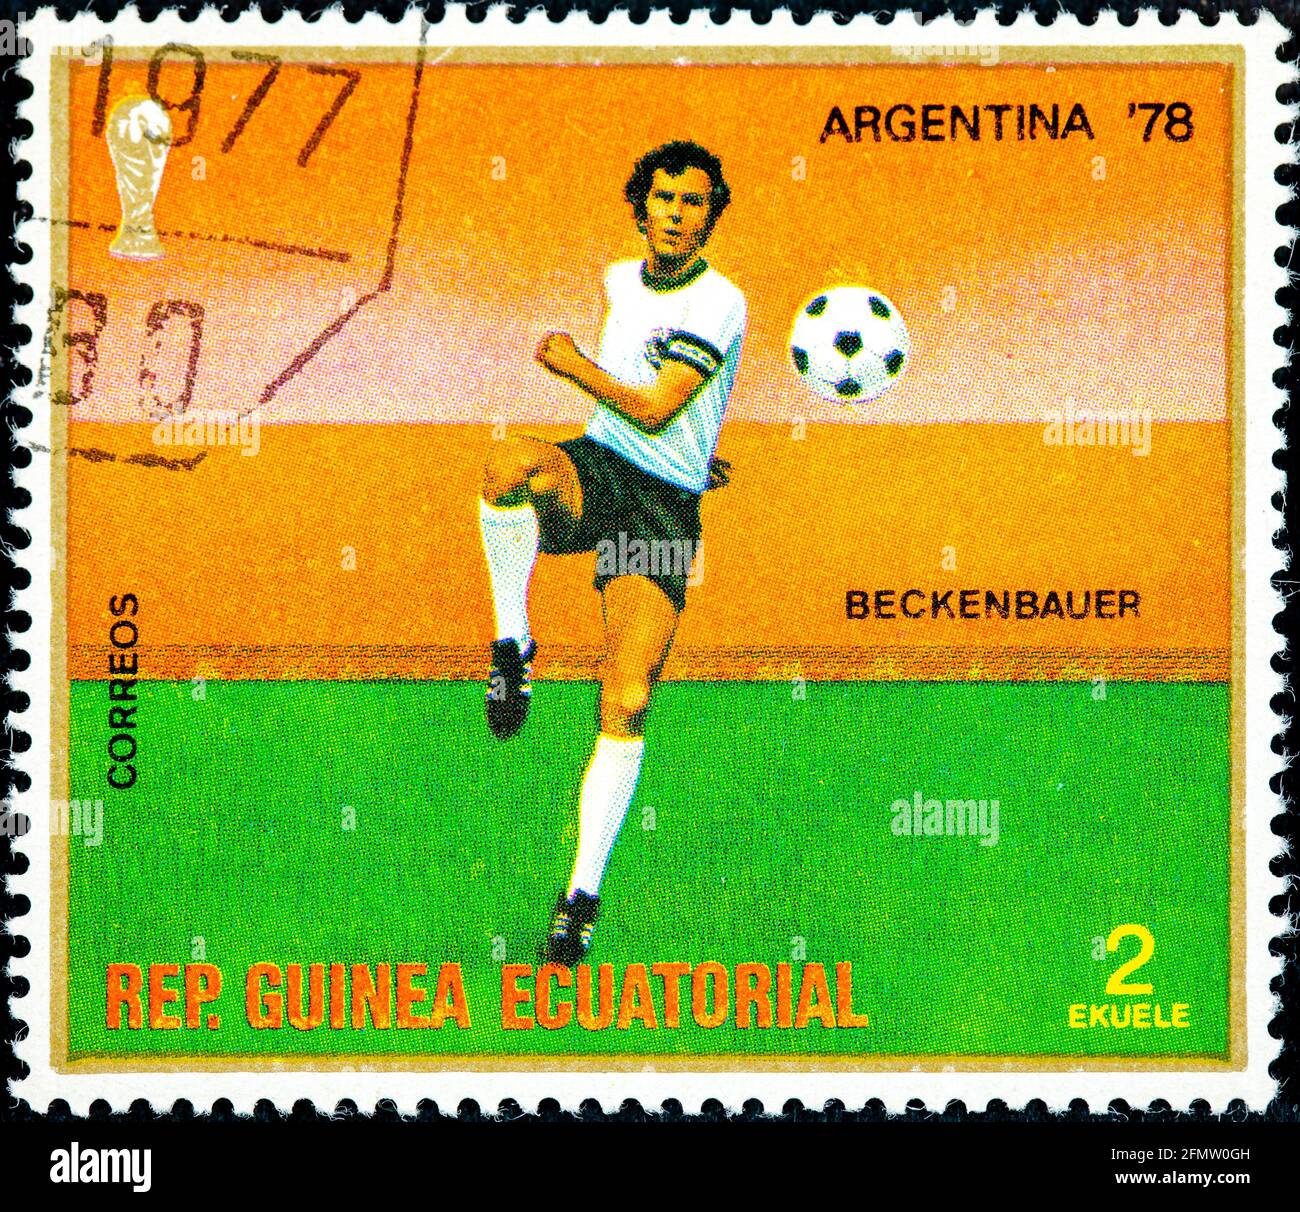 EQUATORIAL GUINEA - CIRCA 1977: A stamp printed in Equatorial Guinea from the ' Football World Cup, Argentina 1978' issue shows Beckenbauer, circa 197 Stock Photo